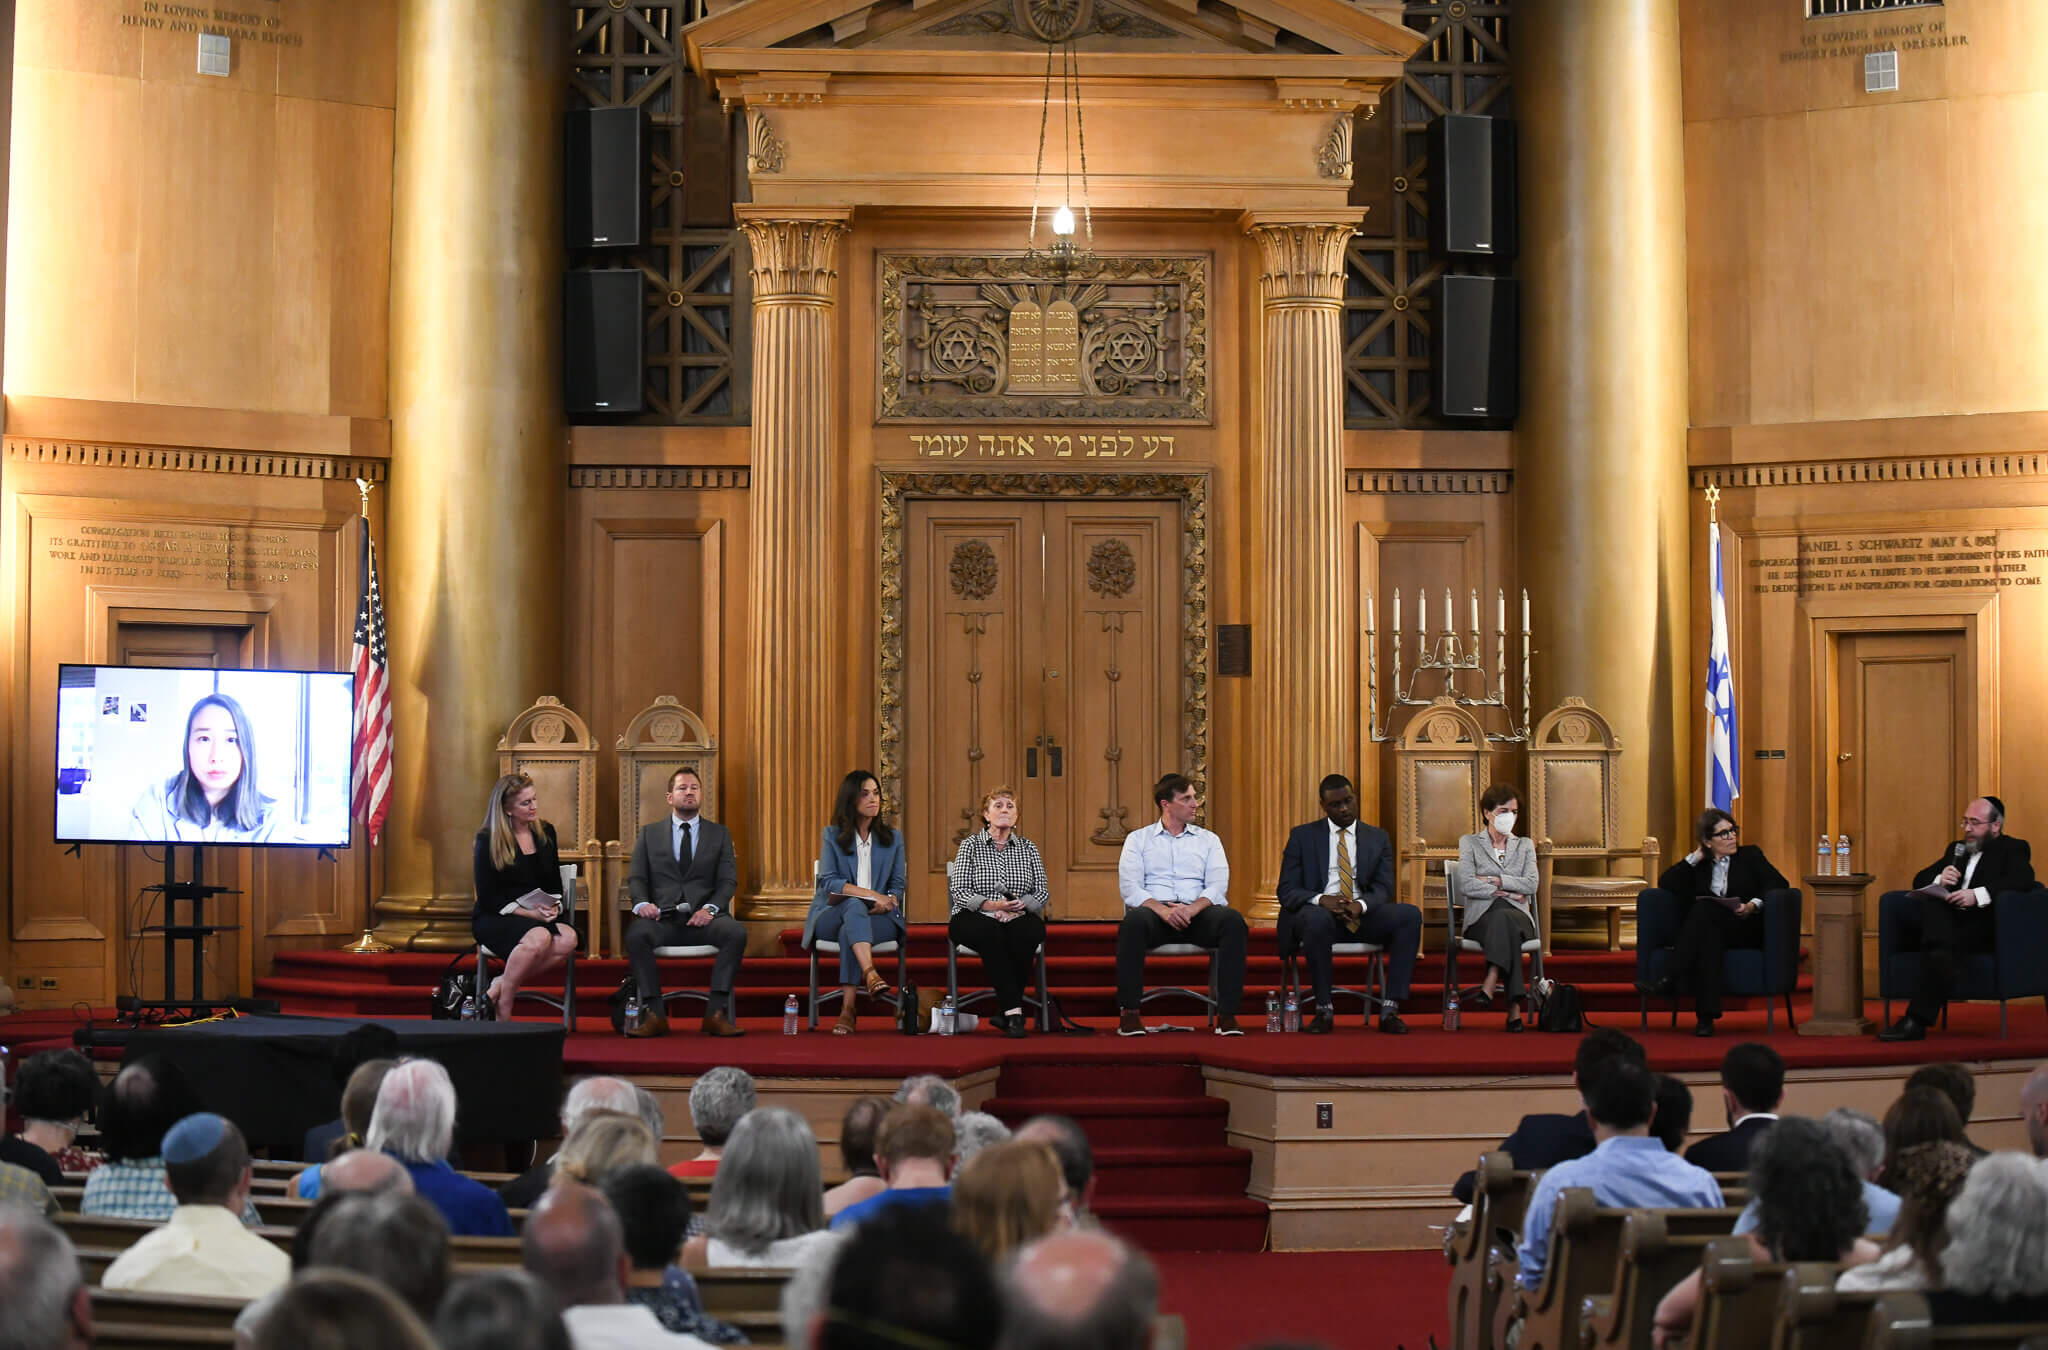 Assemblymember Yuh-Line Niou (left, on video screen), then from left to right, former public defender Maud Maron,  small business owner Brian Robinson, City Councilmember Carlina Rivera,  Assemblymember Jo Anne Simon,  former House impeachment counsel Dan Goldman, Rep. Mondaire Jones and former Rep. Elizabeth Holtzman at the candidate forum for New York's 10th Congressional District co-hosted by the Forward at Congregation Beth Elohim (CBE) in Brooklyn on July 26, 2022.